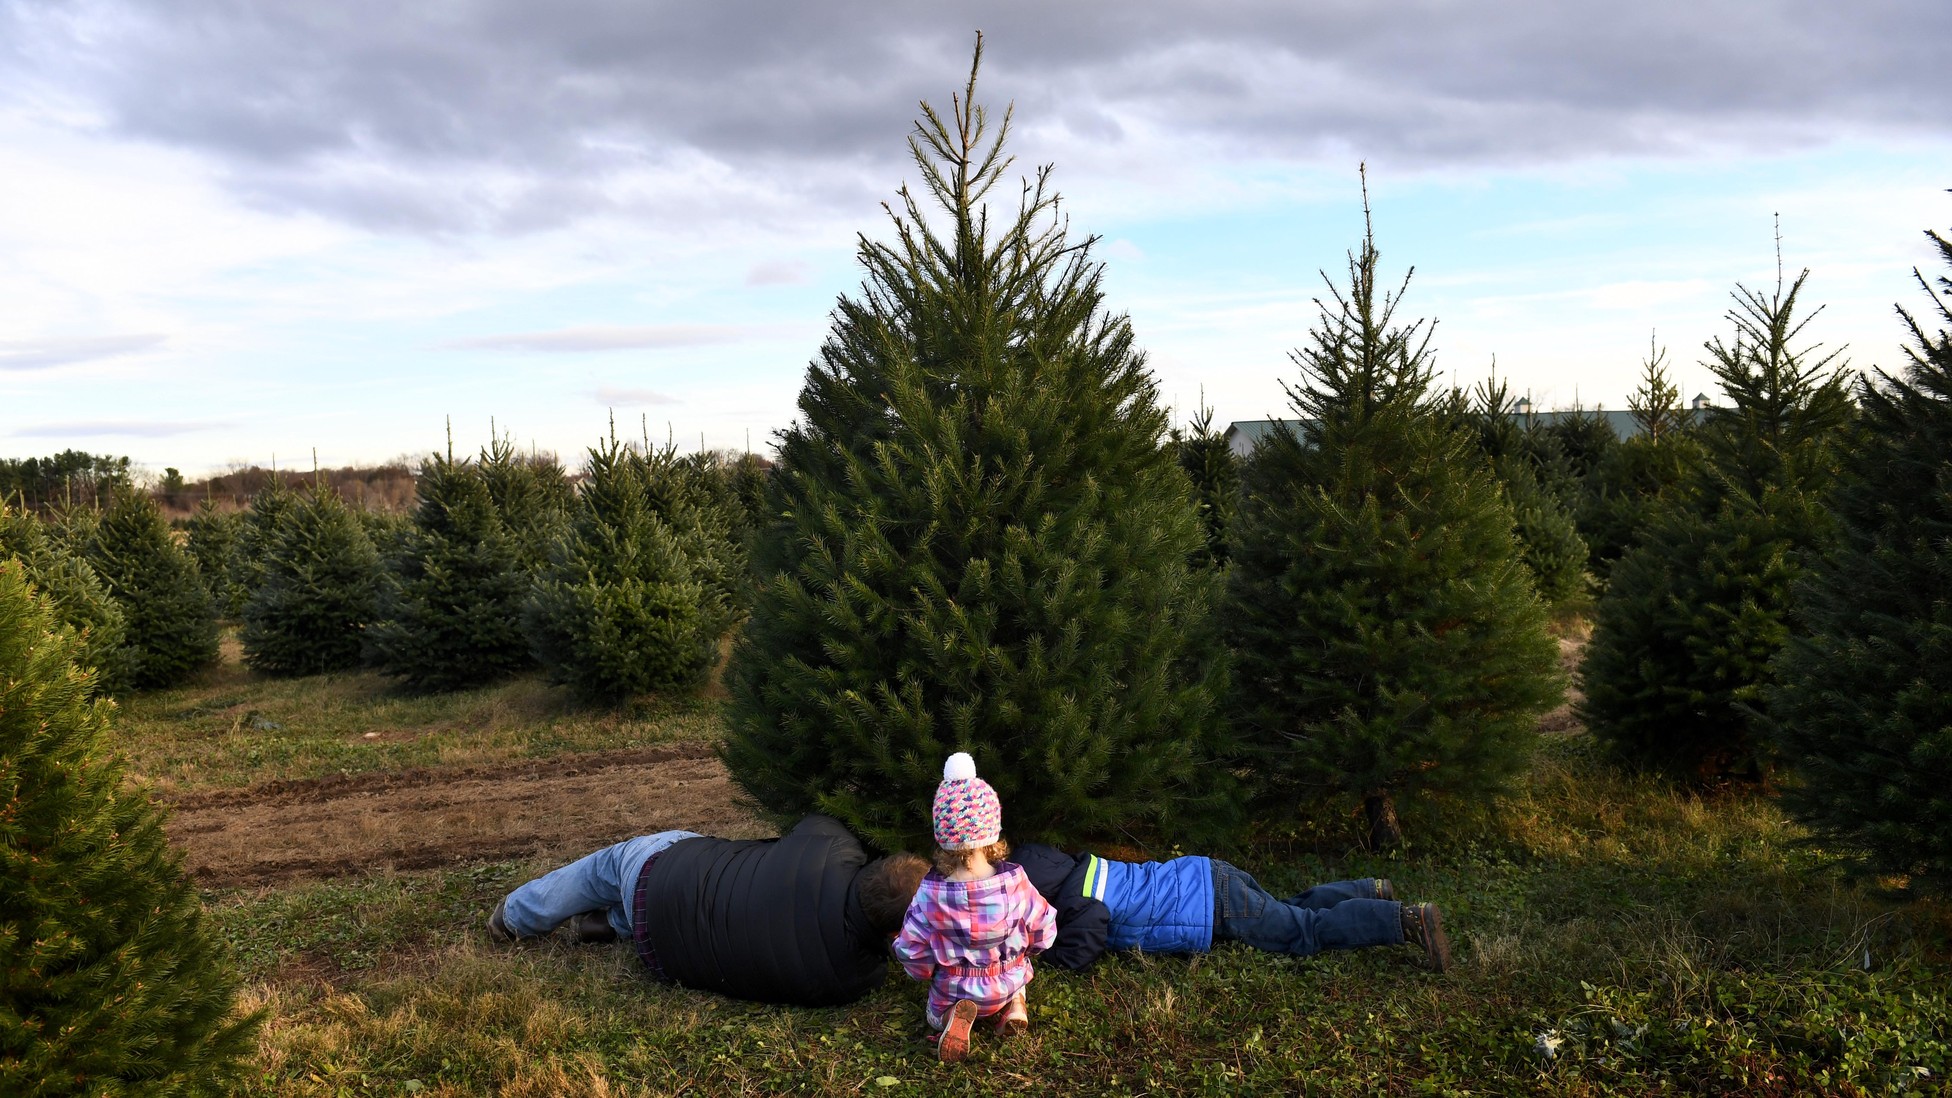 The ChristmasTree Shortage Could Last for Years The Atlantic